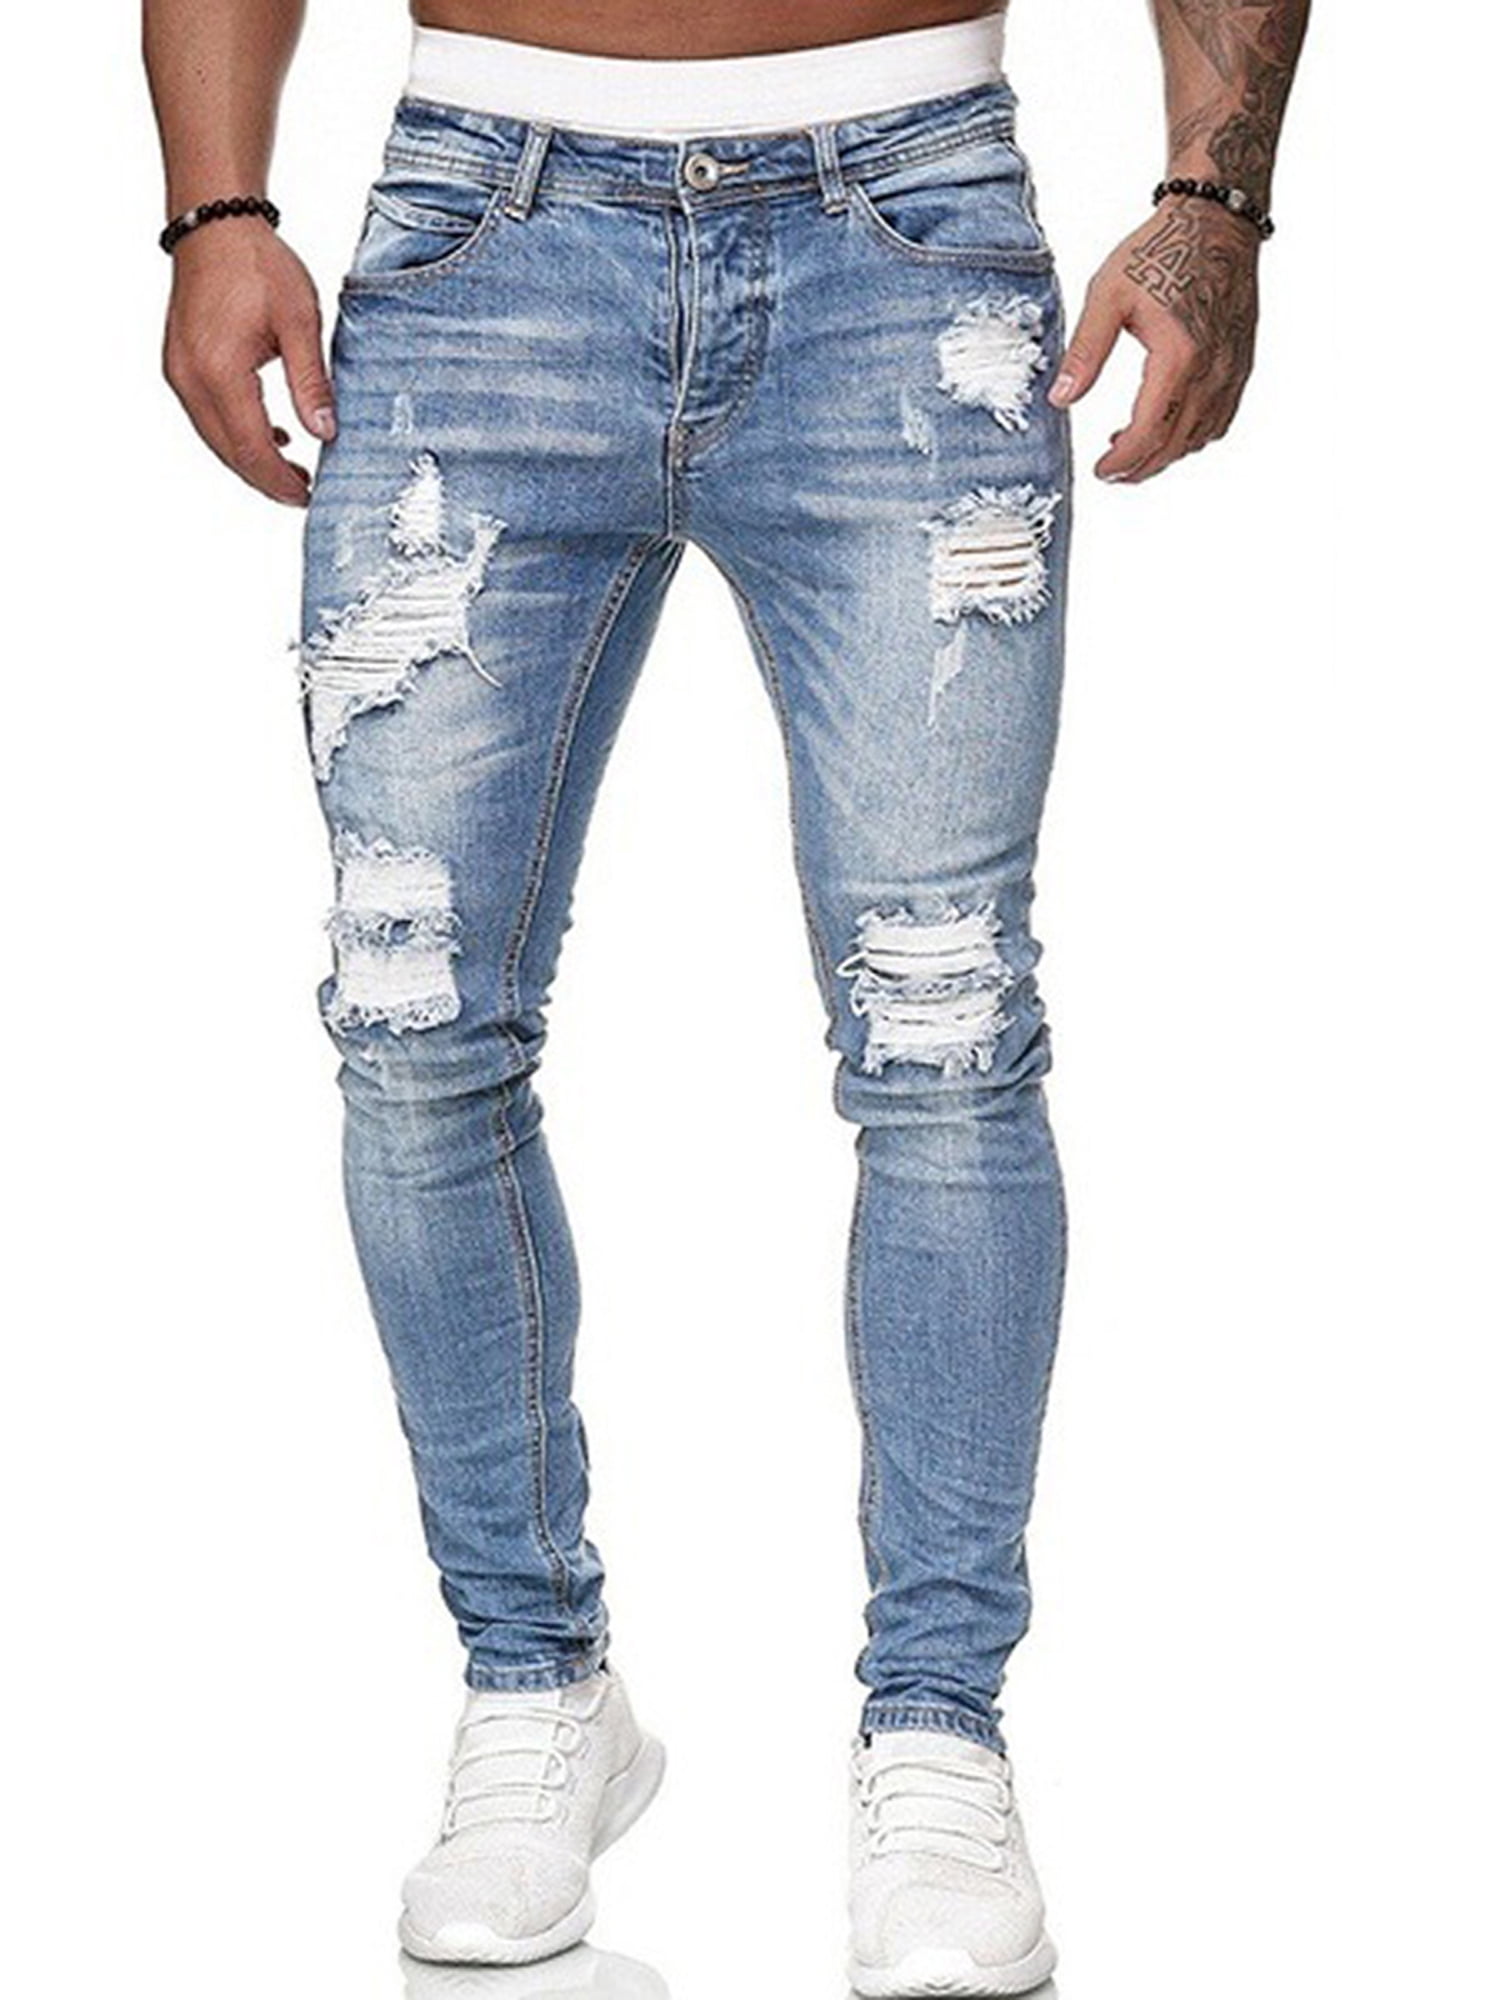 Men?s Stretch Skinny Ripped Jeans, Super Comfy Distressed Denim Pants with  Destroyed Holes